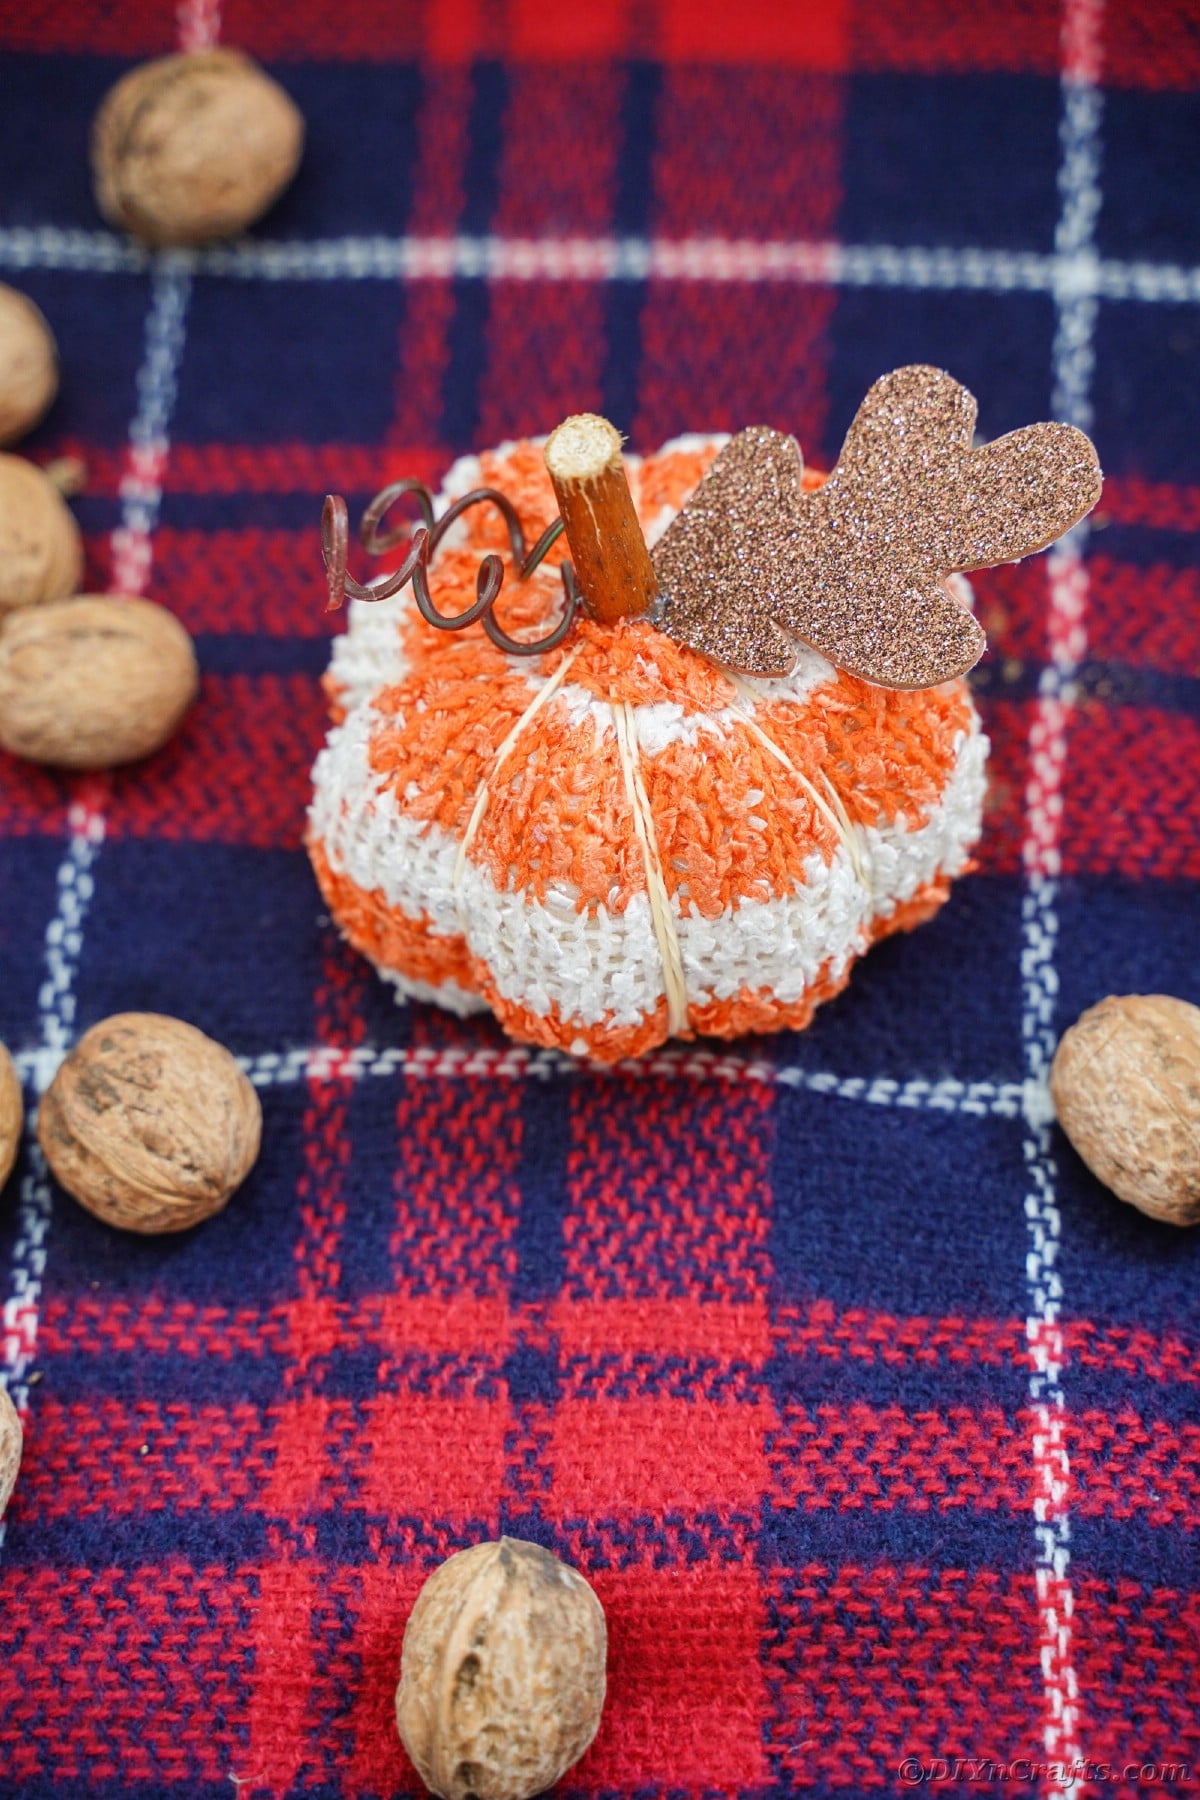 Blue plaid fabric with pecans in shell and stuffed pumpkin